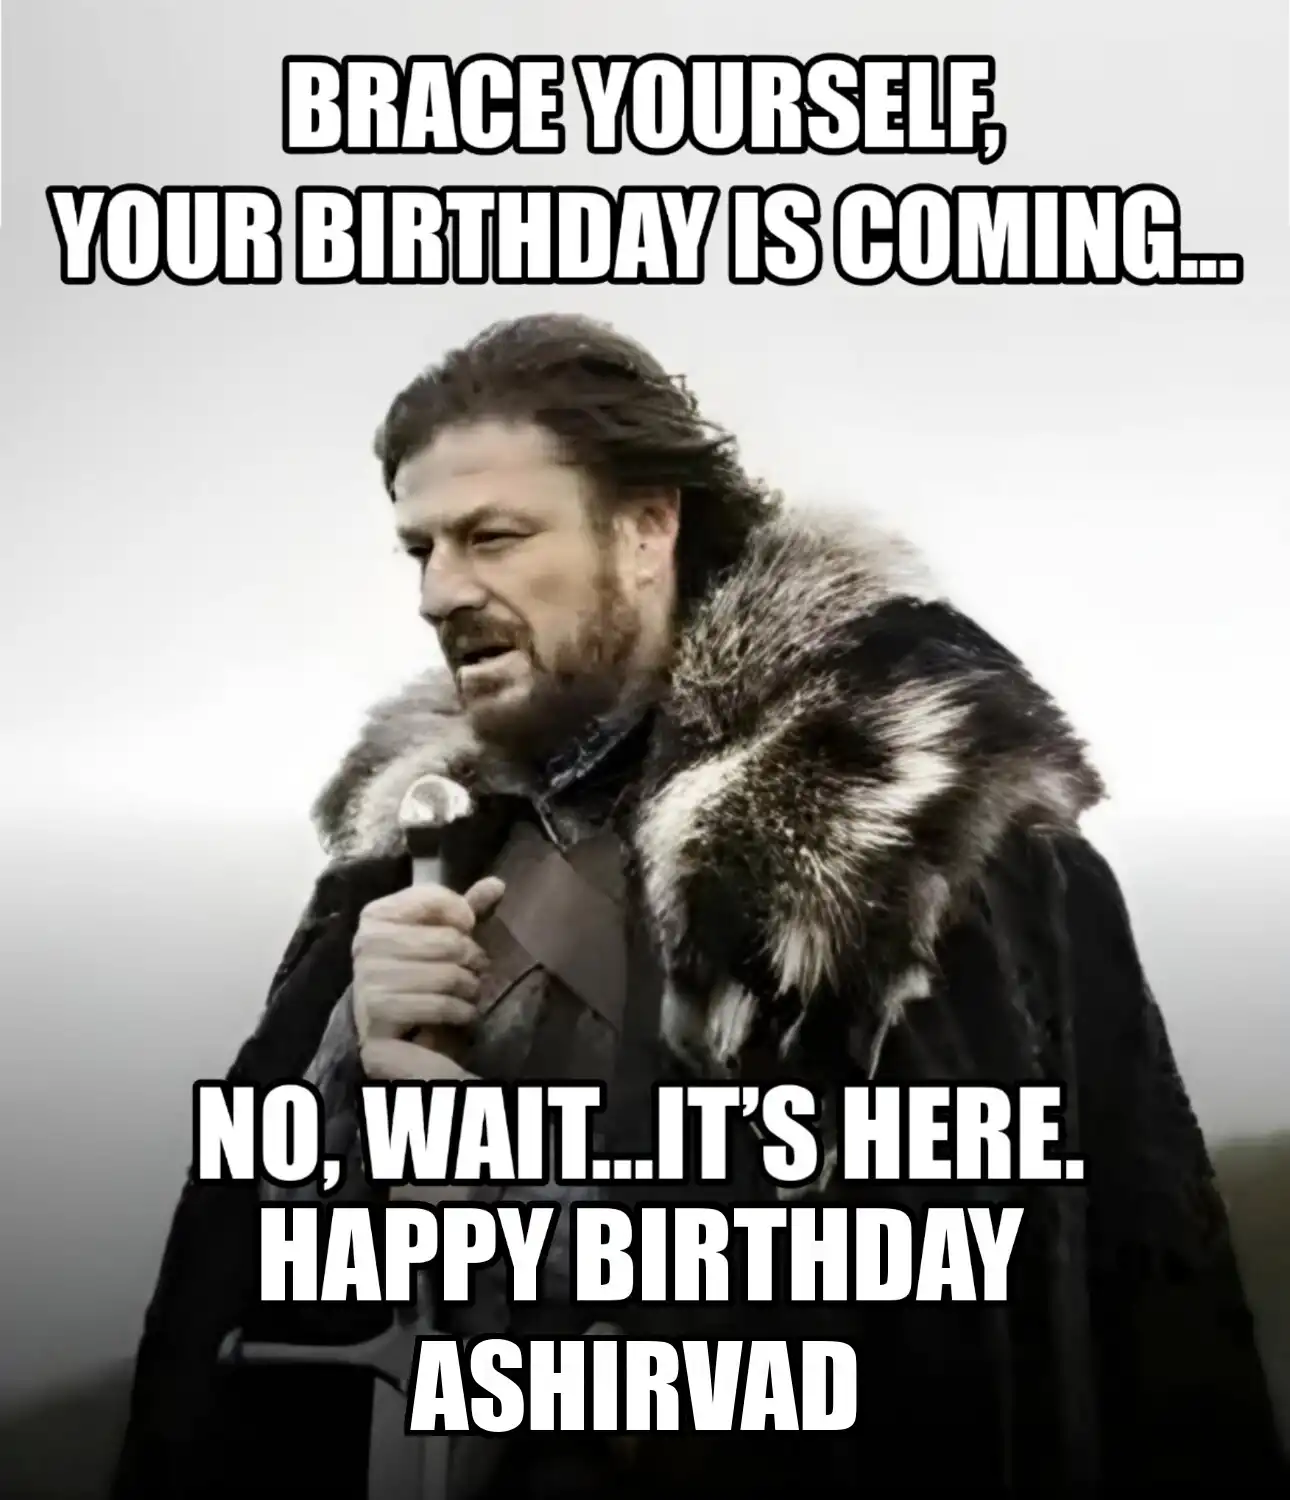 Happy Birthday Ashirvad Brace Yourself Your Birthday Is Coming Meme